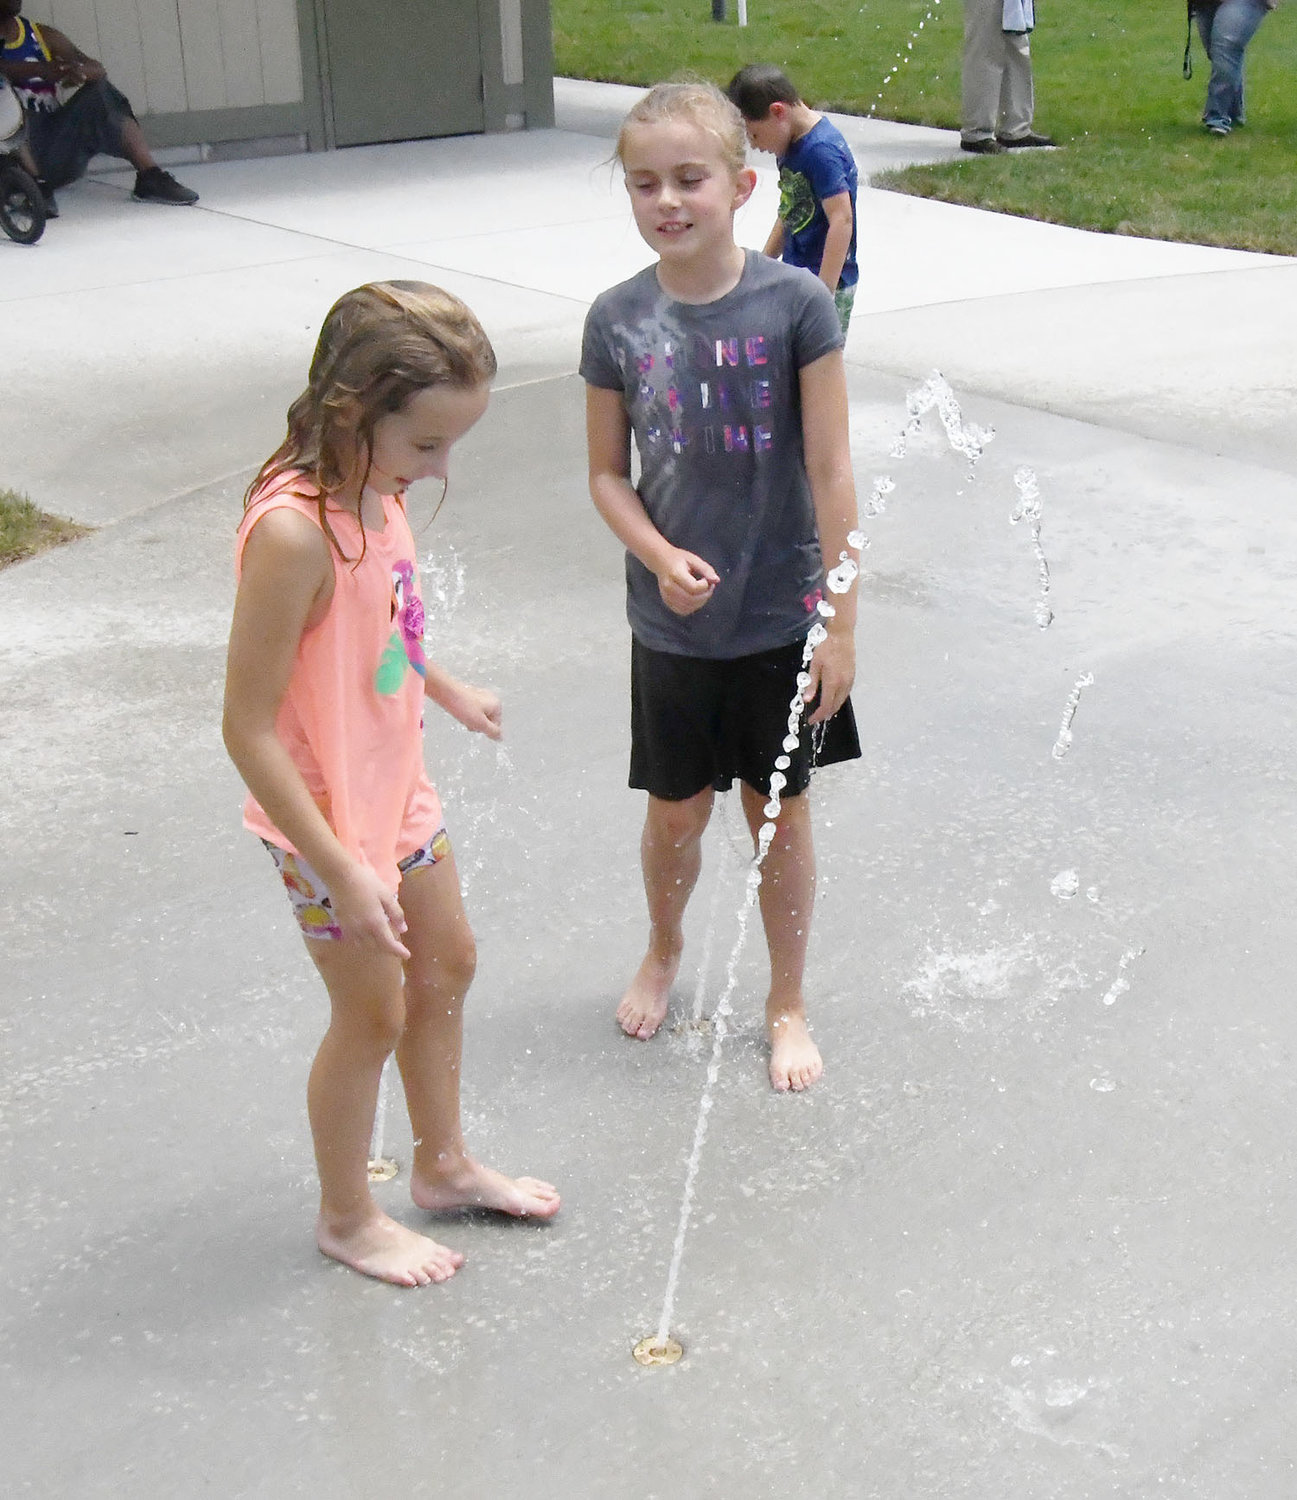 Ground water features have been a hit with youngsters at the new Tannehill Park Splash Pad.